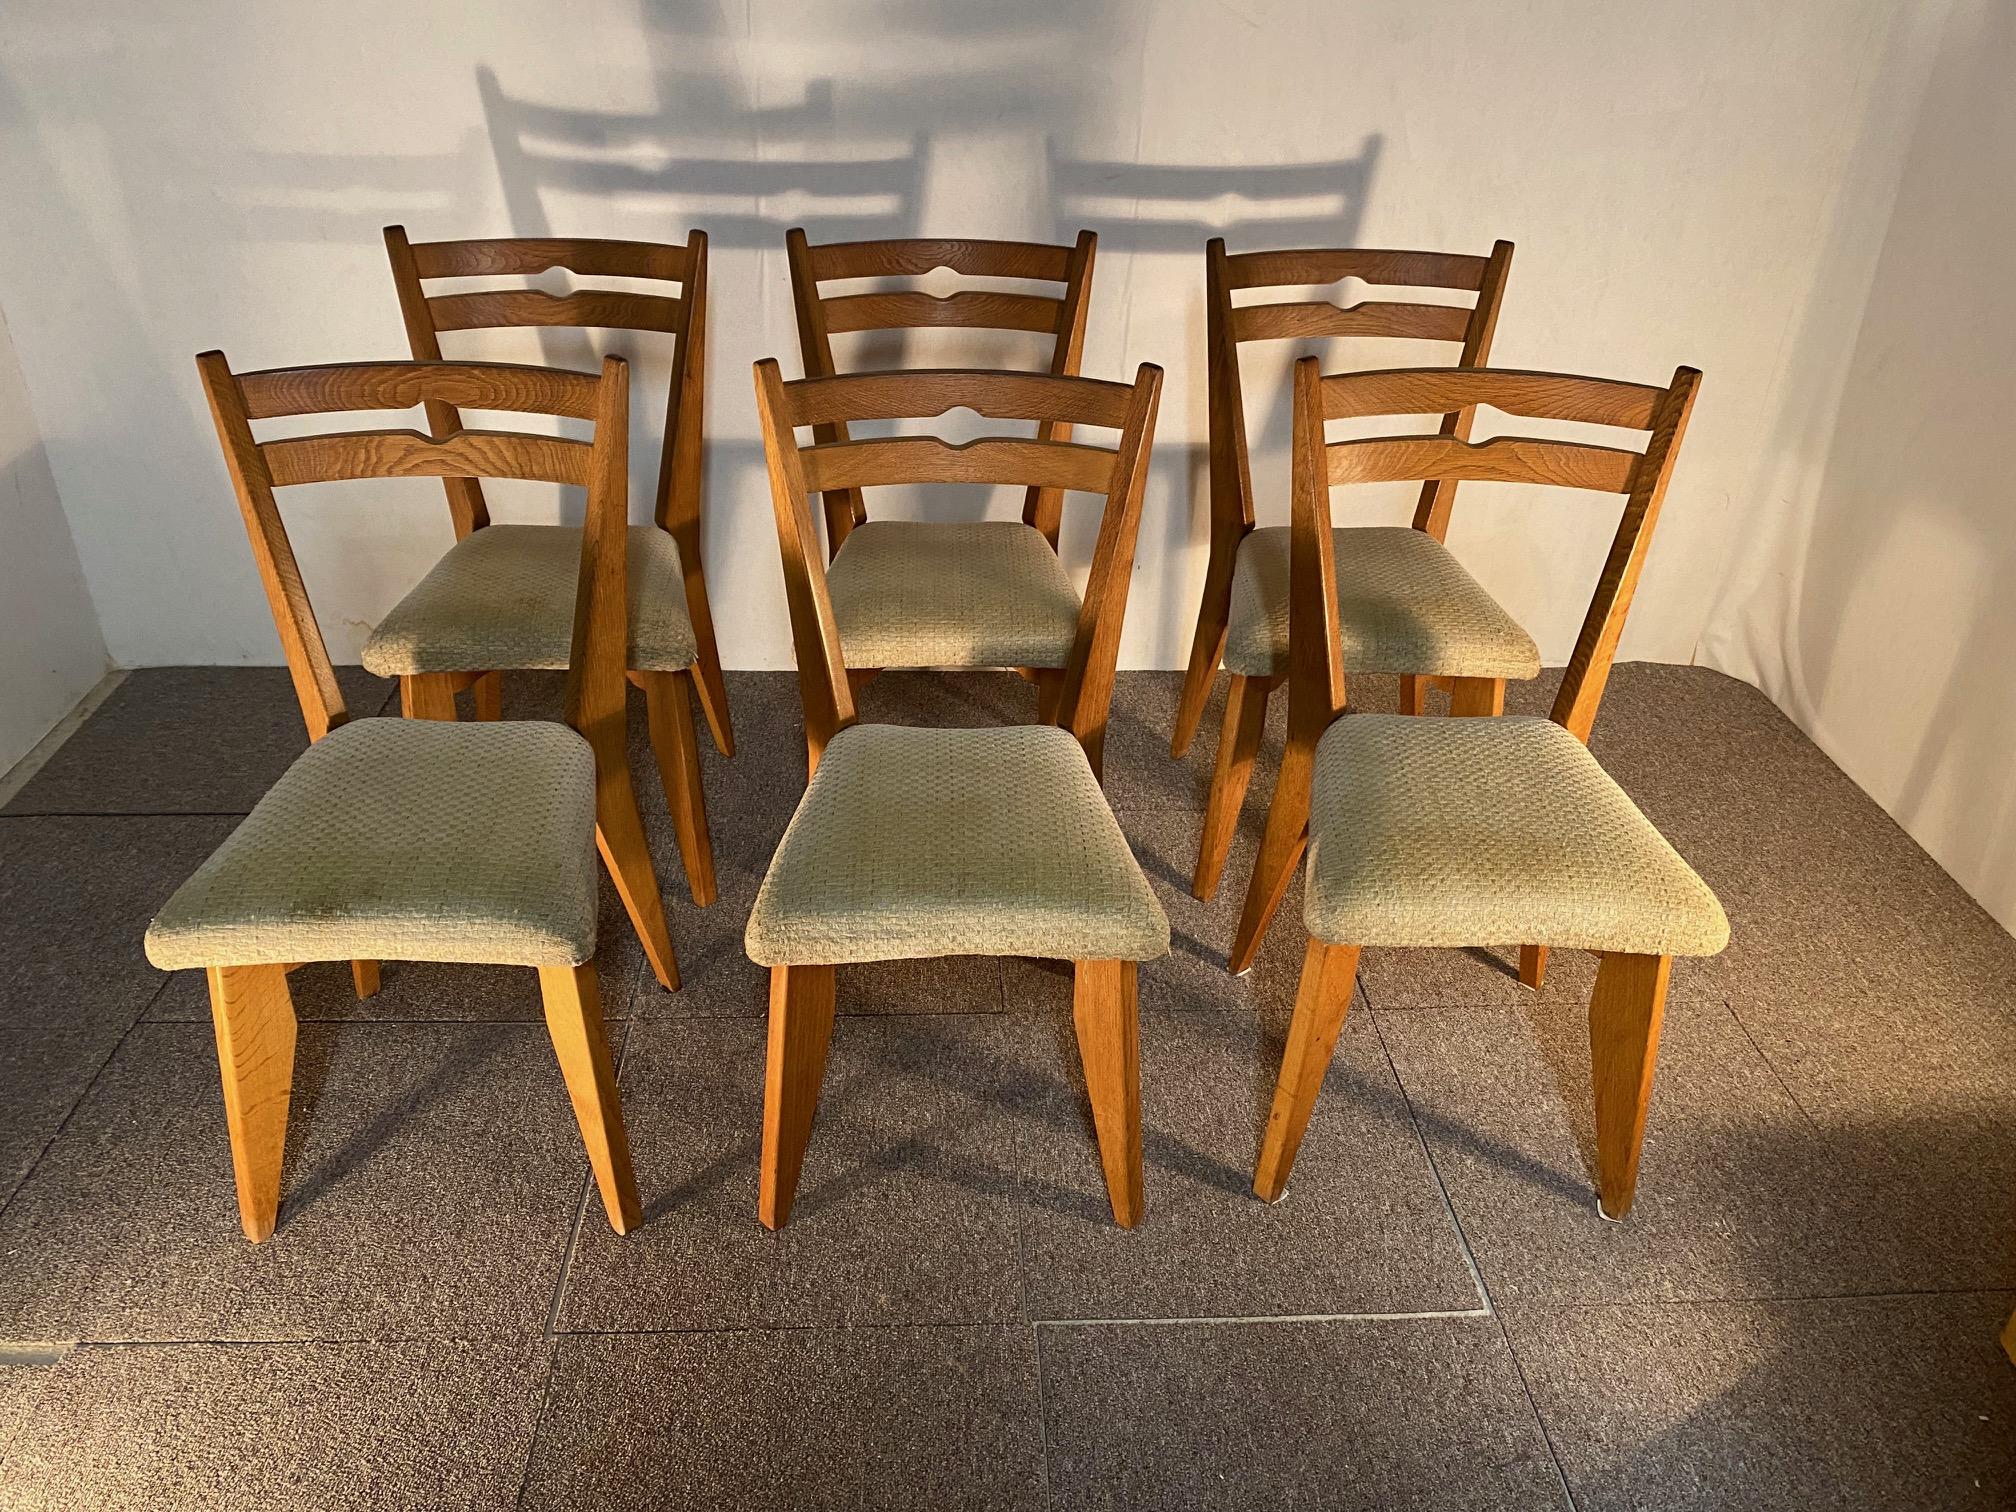 Six chairs, Guillerme and Chambron in oak, from the 1960s.
They are in good condition.Six chairs, Guillerme and Chambron in oak, from the 1960s.
They are in good condition.

Robert GUILLERME (1013-1990) & Jacques CHAMBRON (1914-2001) met on the